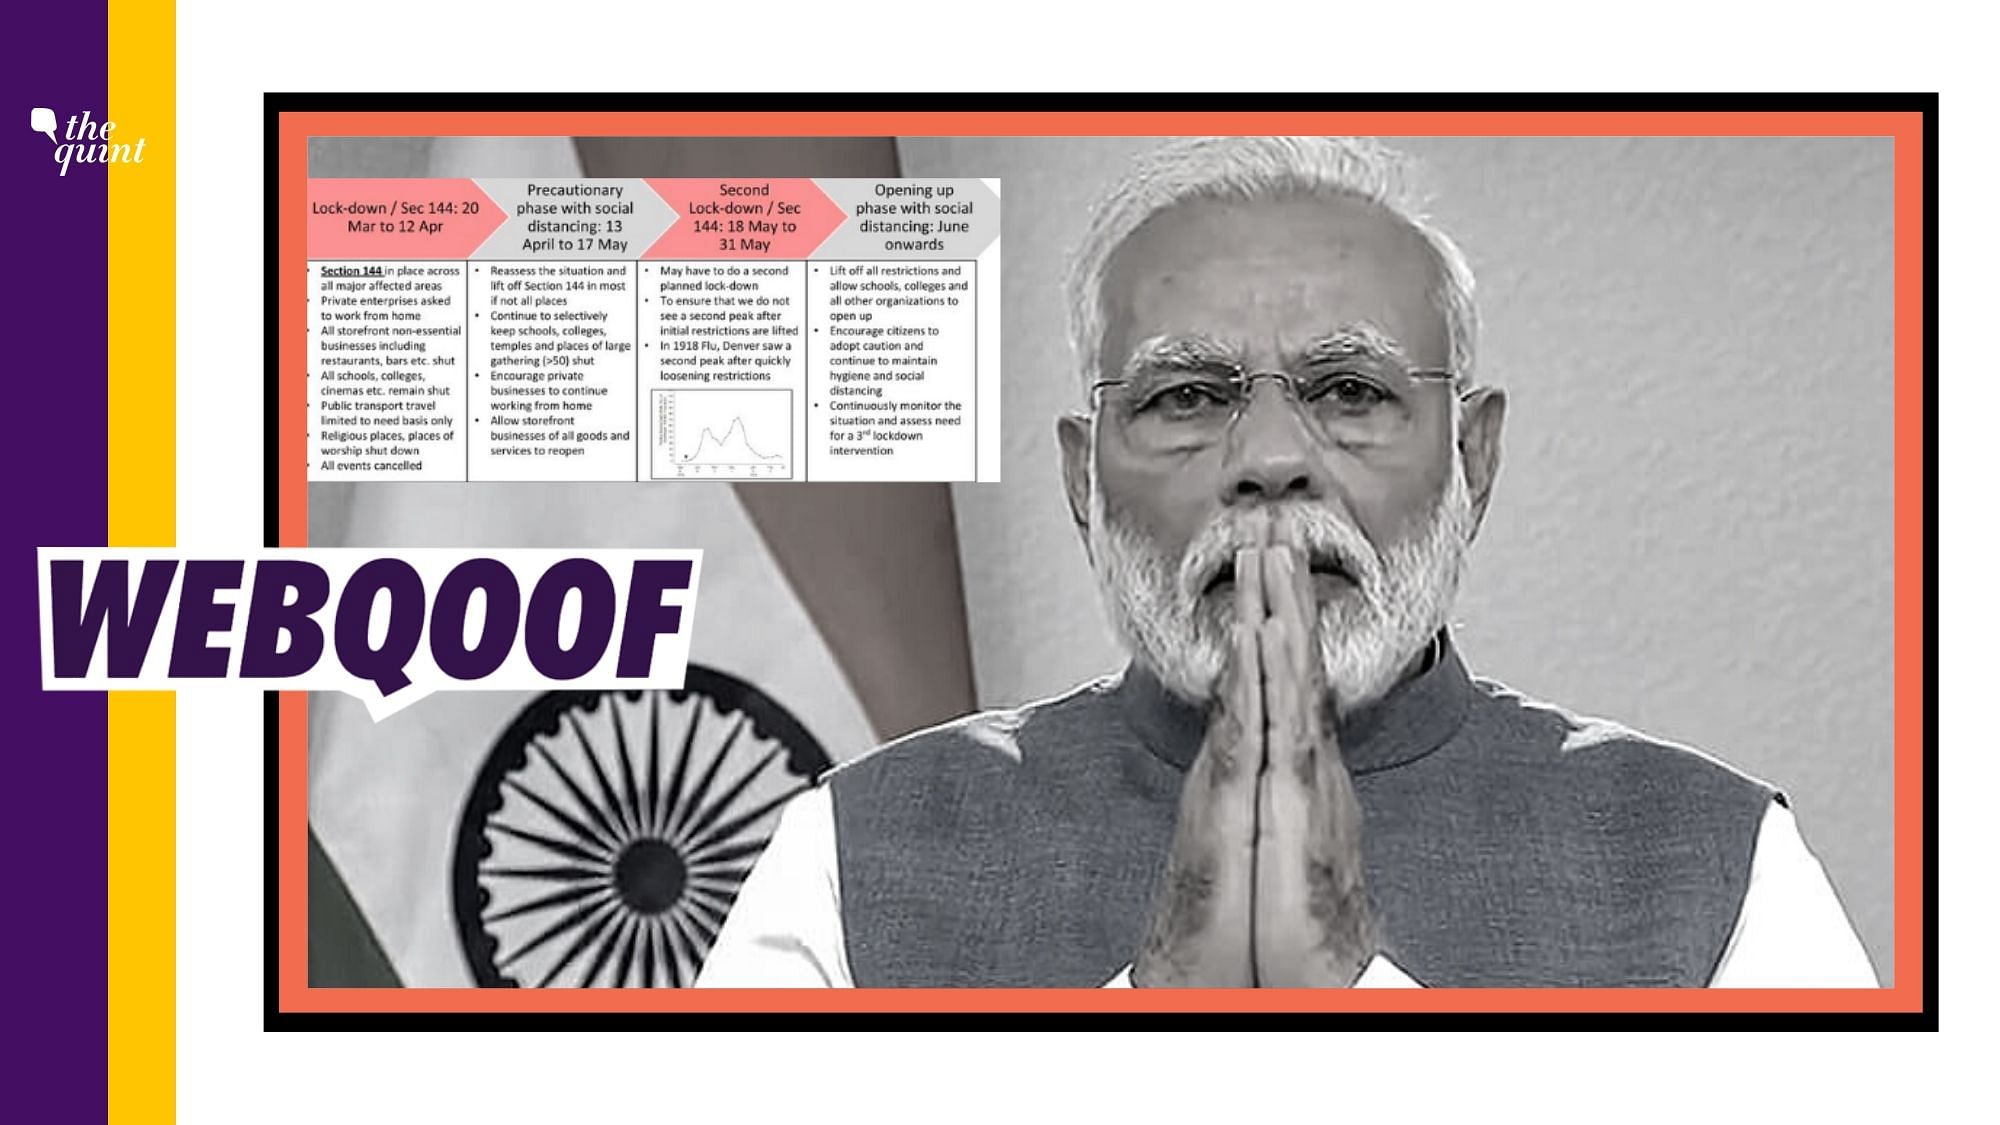 A viral image falsely claimed that it was a part of PM Modi’s presentation for his address at 8 pm on Thursday, 19 March.